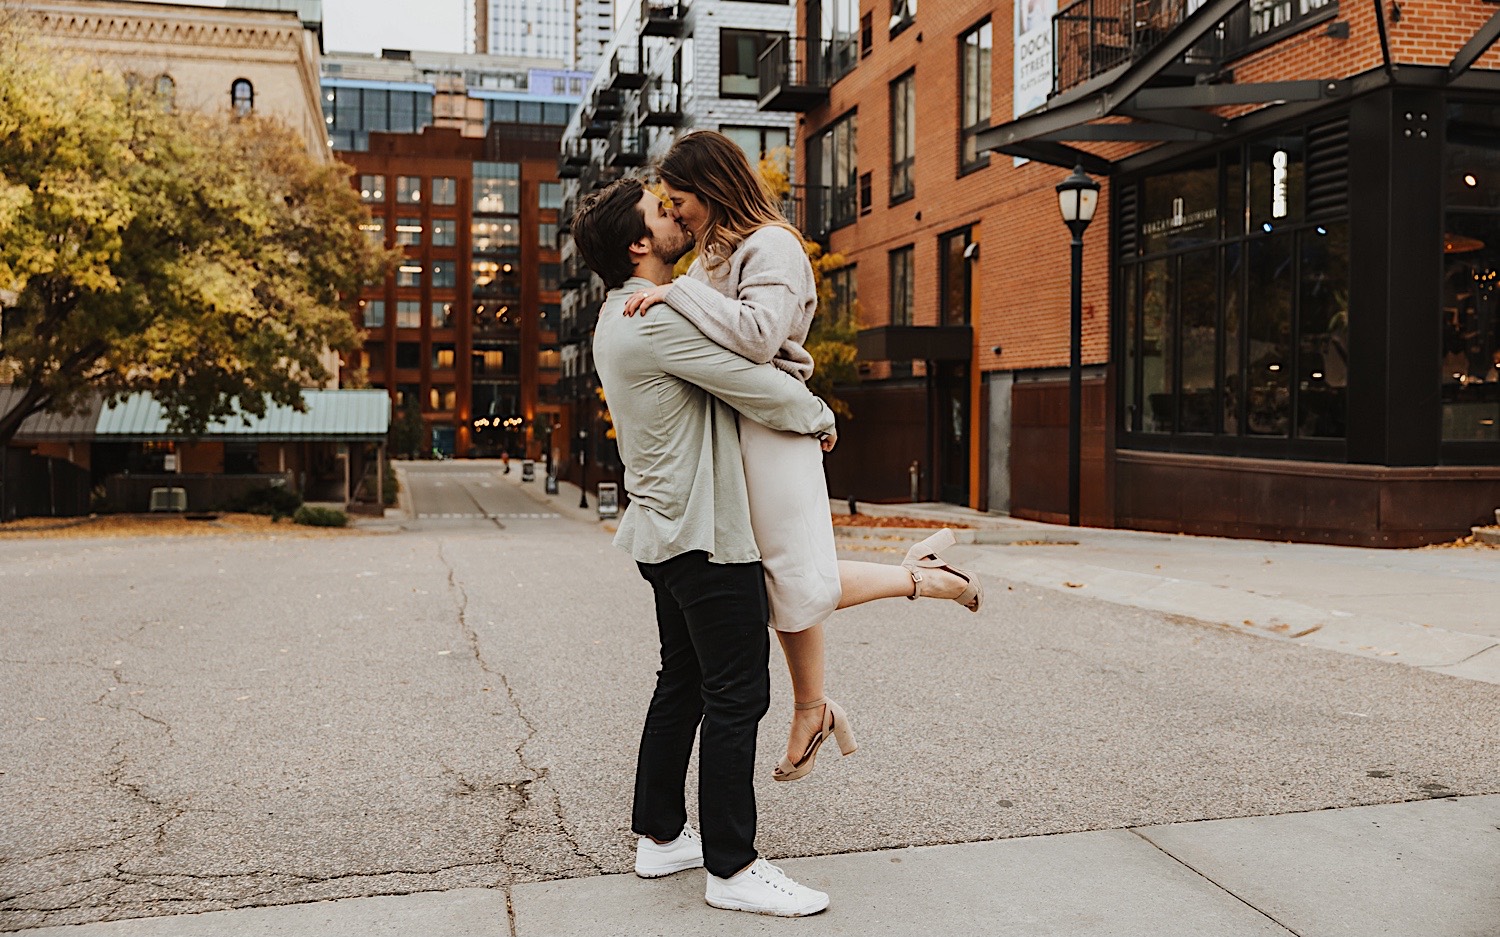 A couple kiss while the woman is lifted in the air by the man during their engagement session in Minneapolis' North Loop